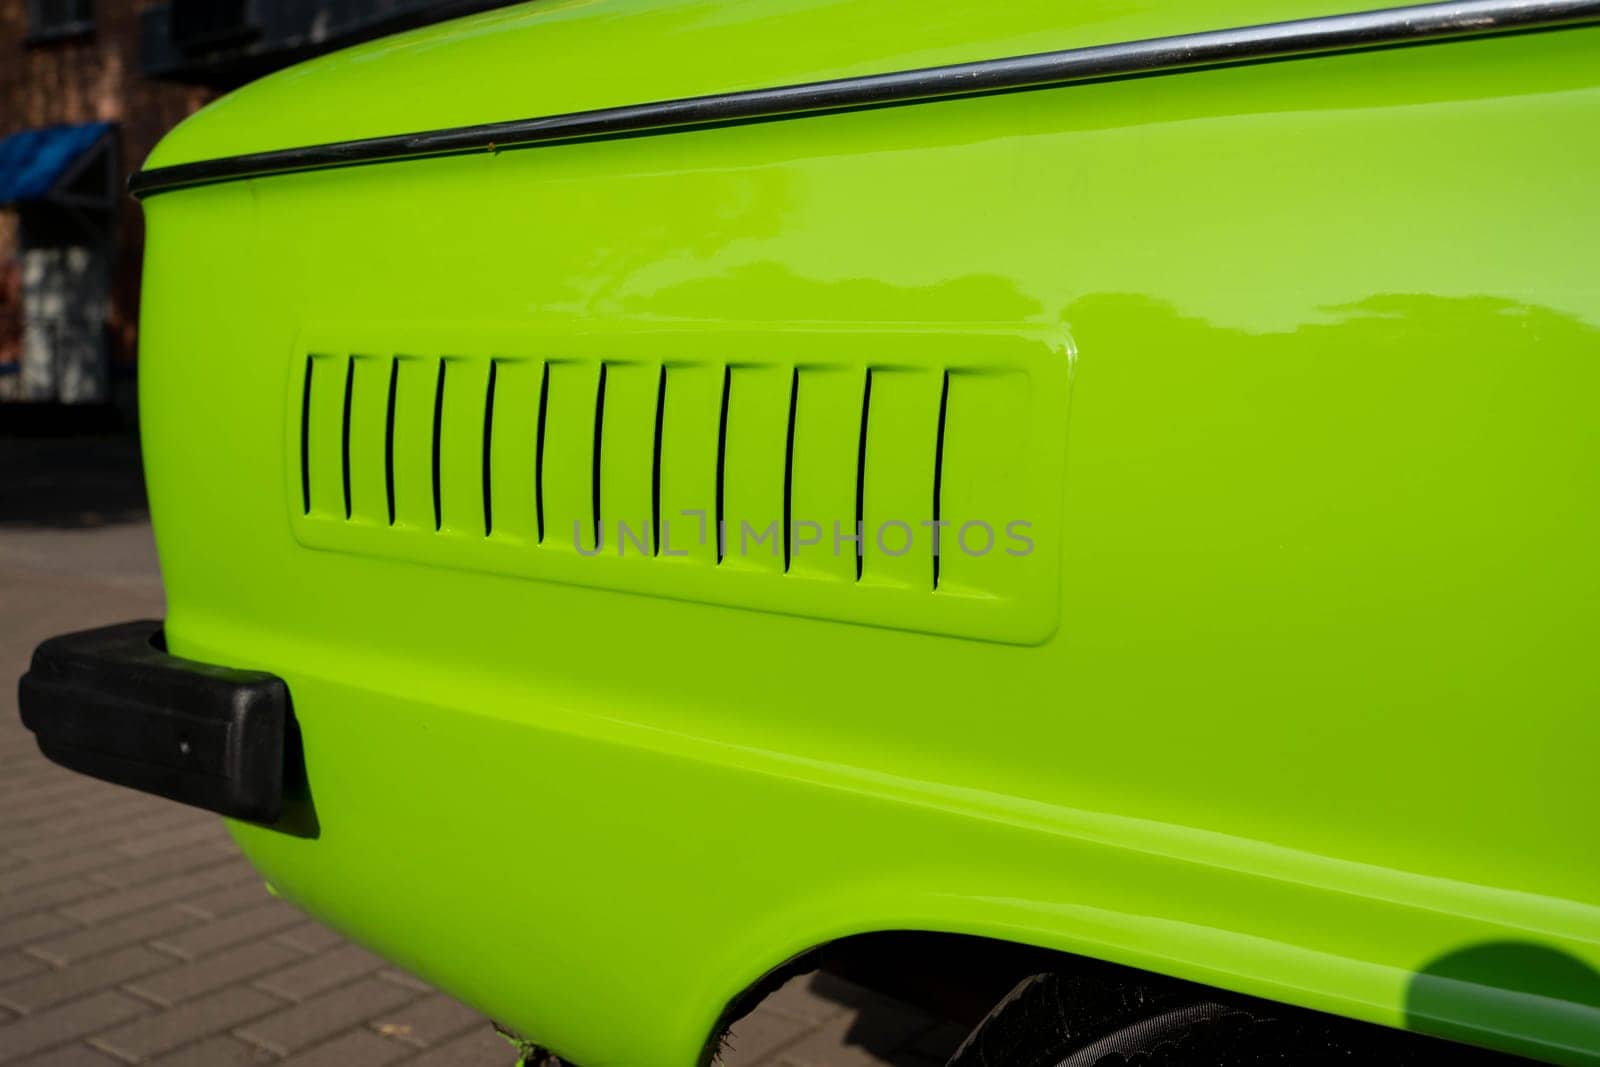 air intake slots for the air cooling engine of the old classic car light green by audiznam2609